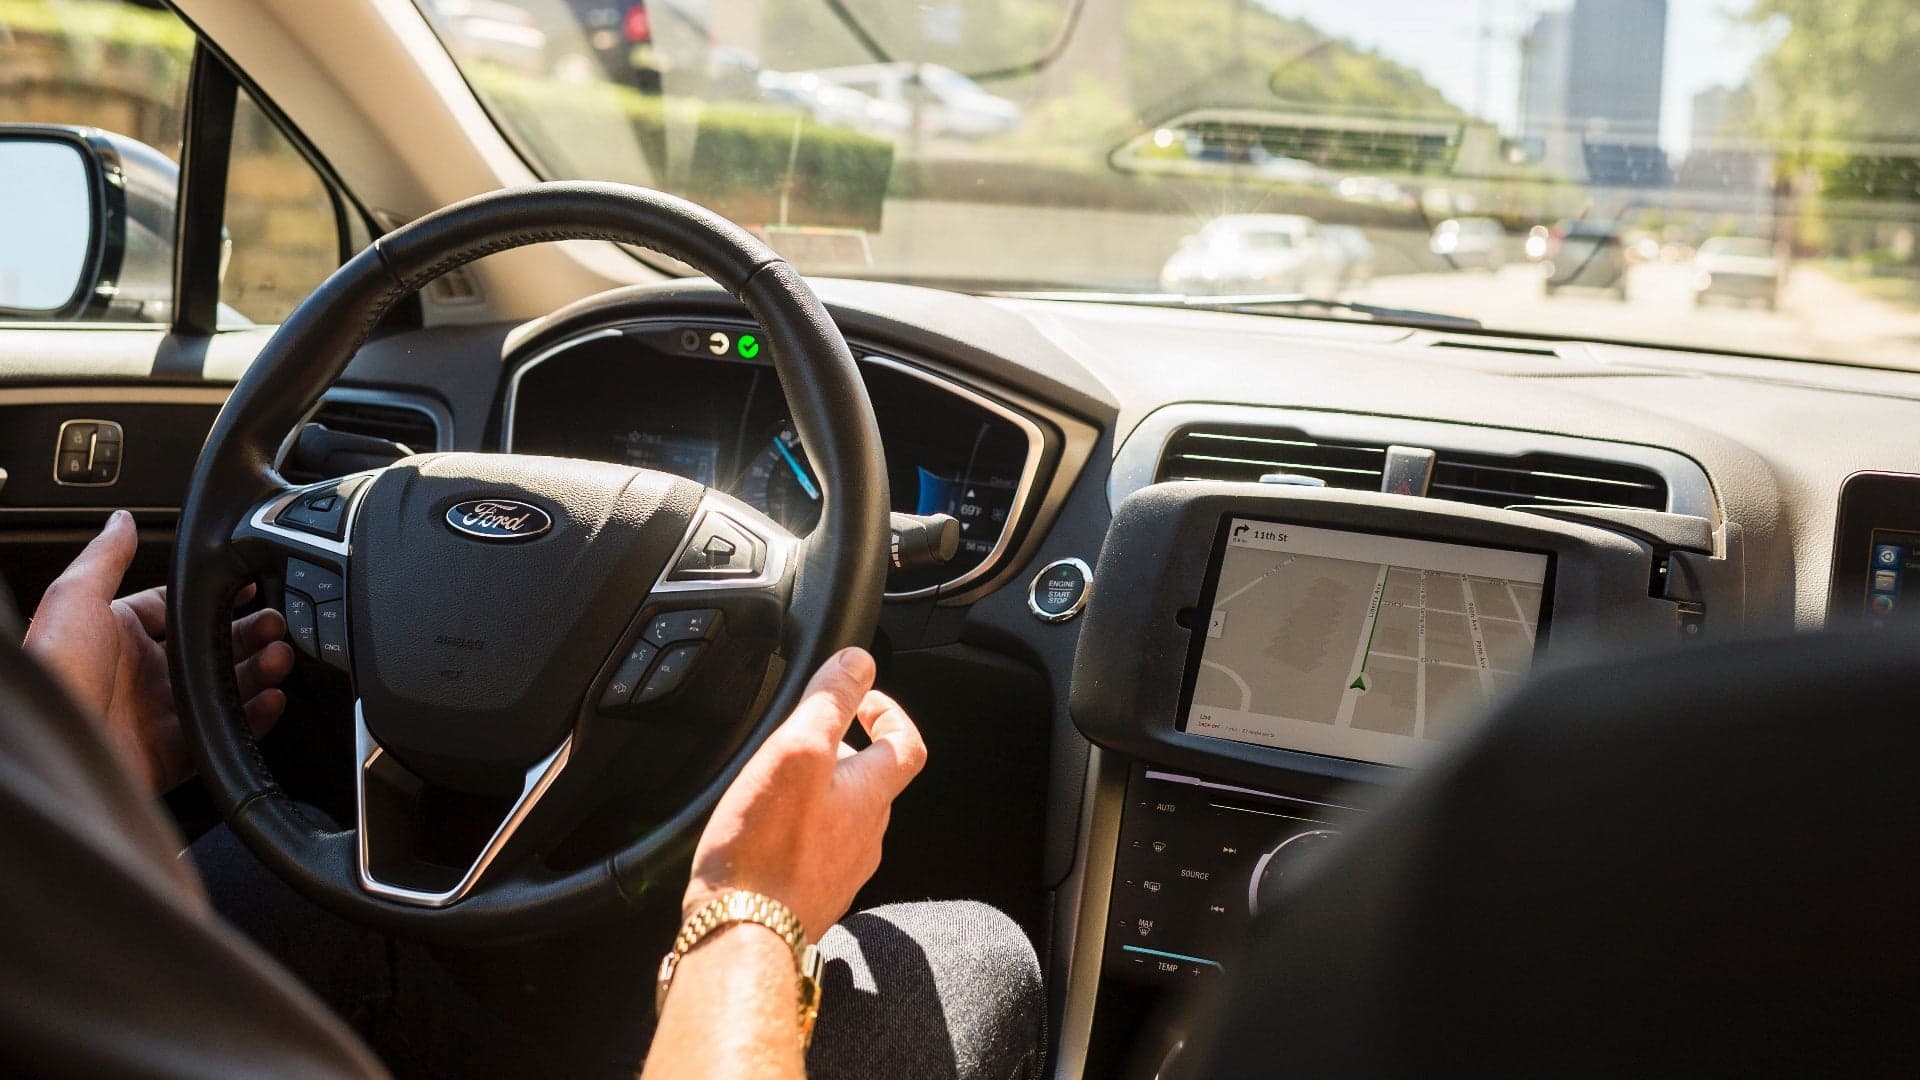 Study Shows Continued Worries About Self-Driving Car Hacking